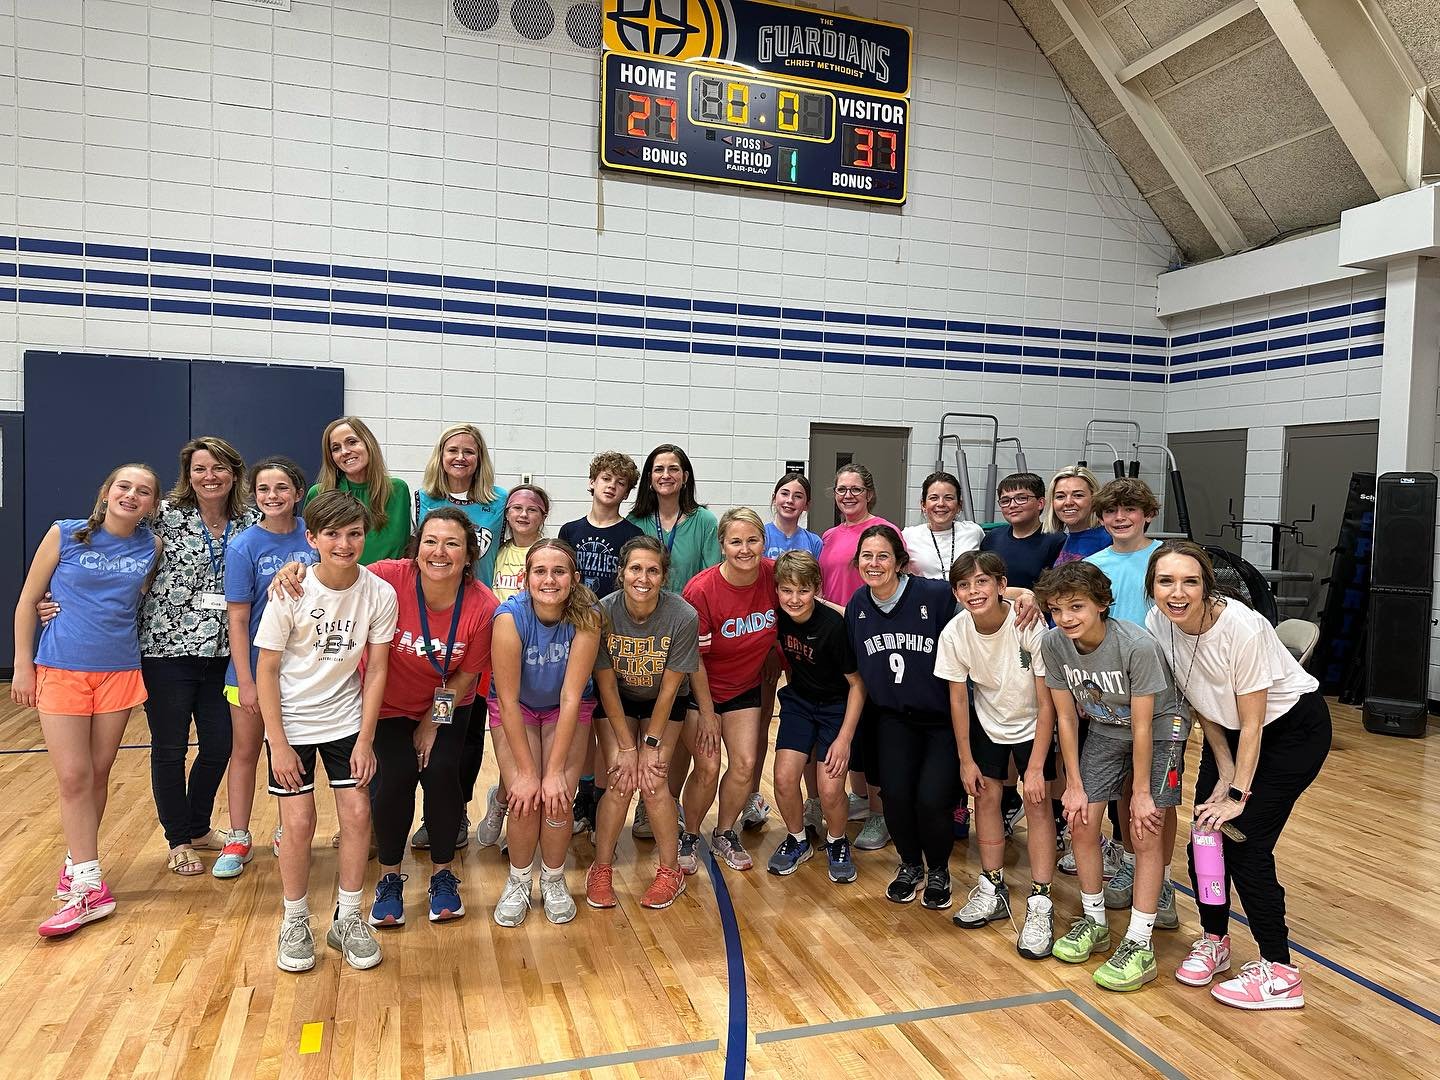 We had so much fun at our annual 6th grade vs. Faculty basketball game! 🏀 Highlight of the game was the half court shot by Stephan that won our students a dress down day! 🎉